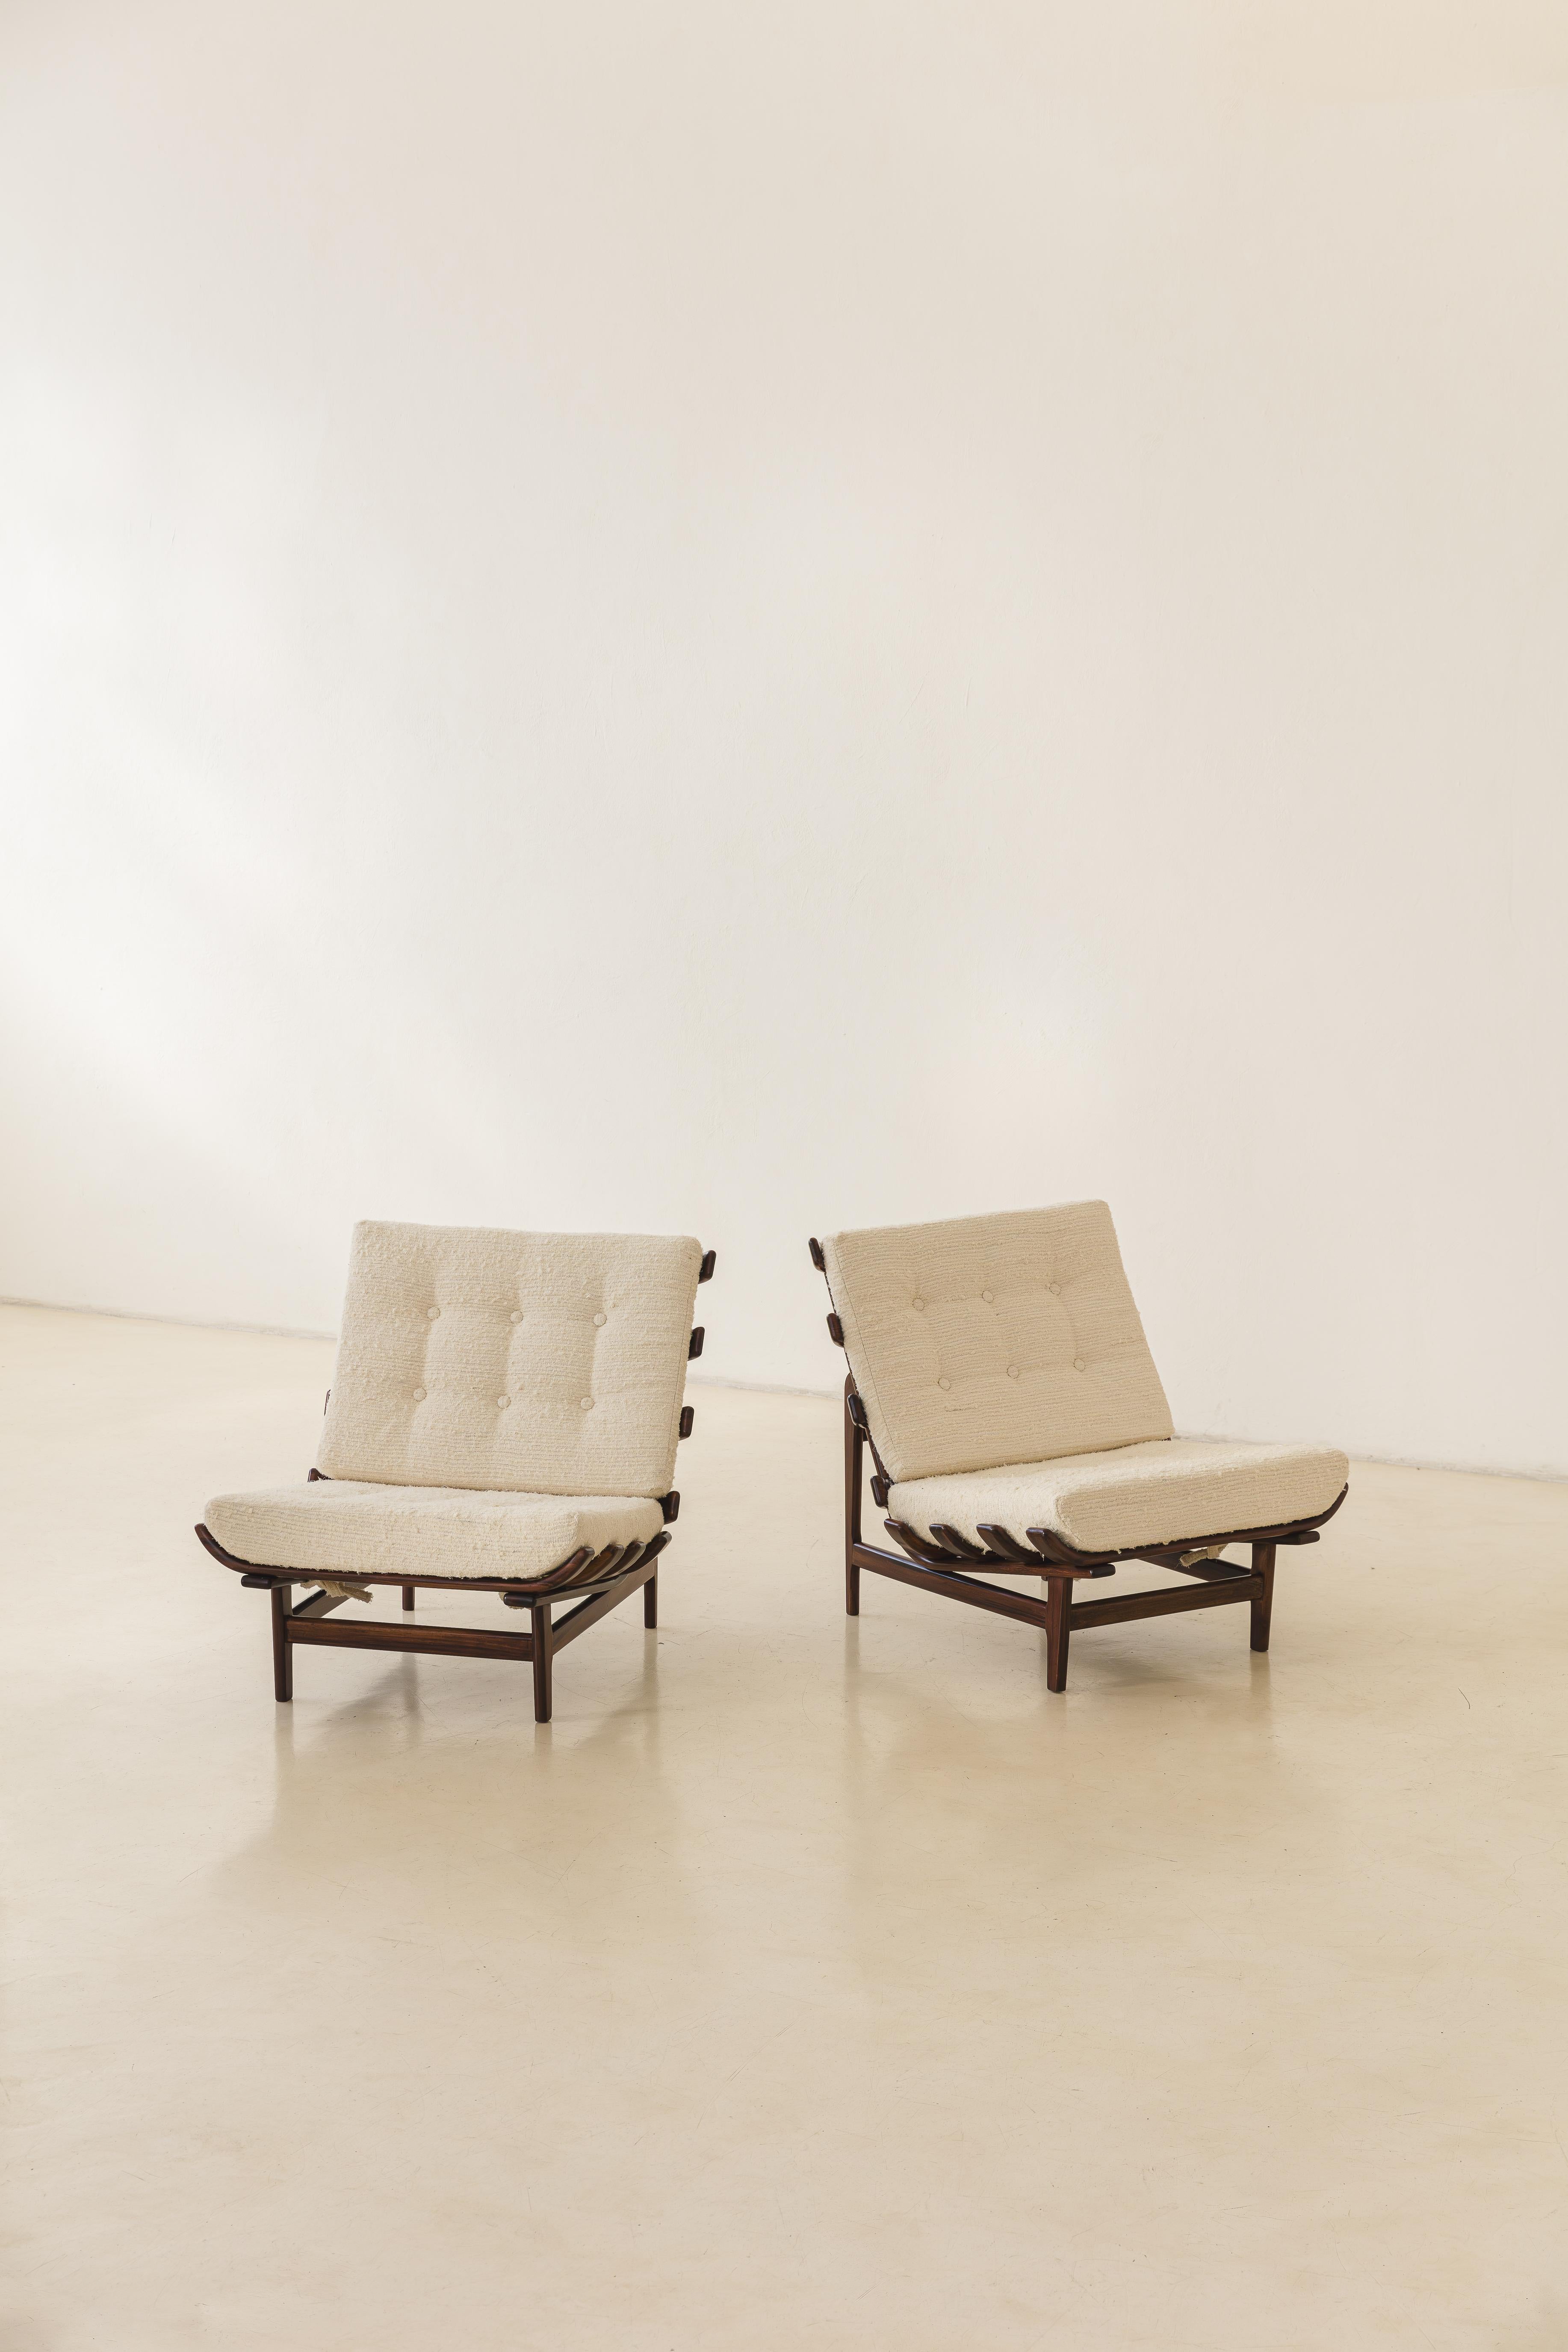 Wood Pair of Armchairs by Móveis de Madeira Pailar, 1960s For Sale